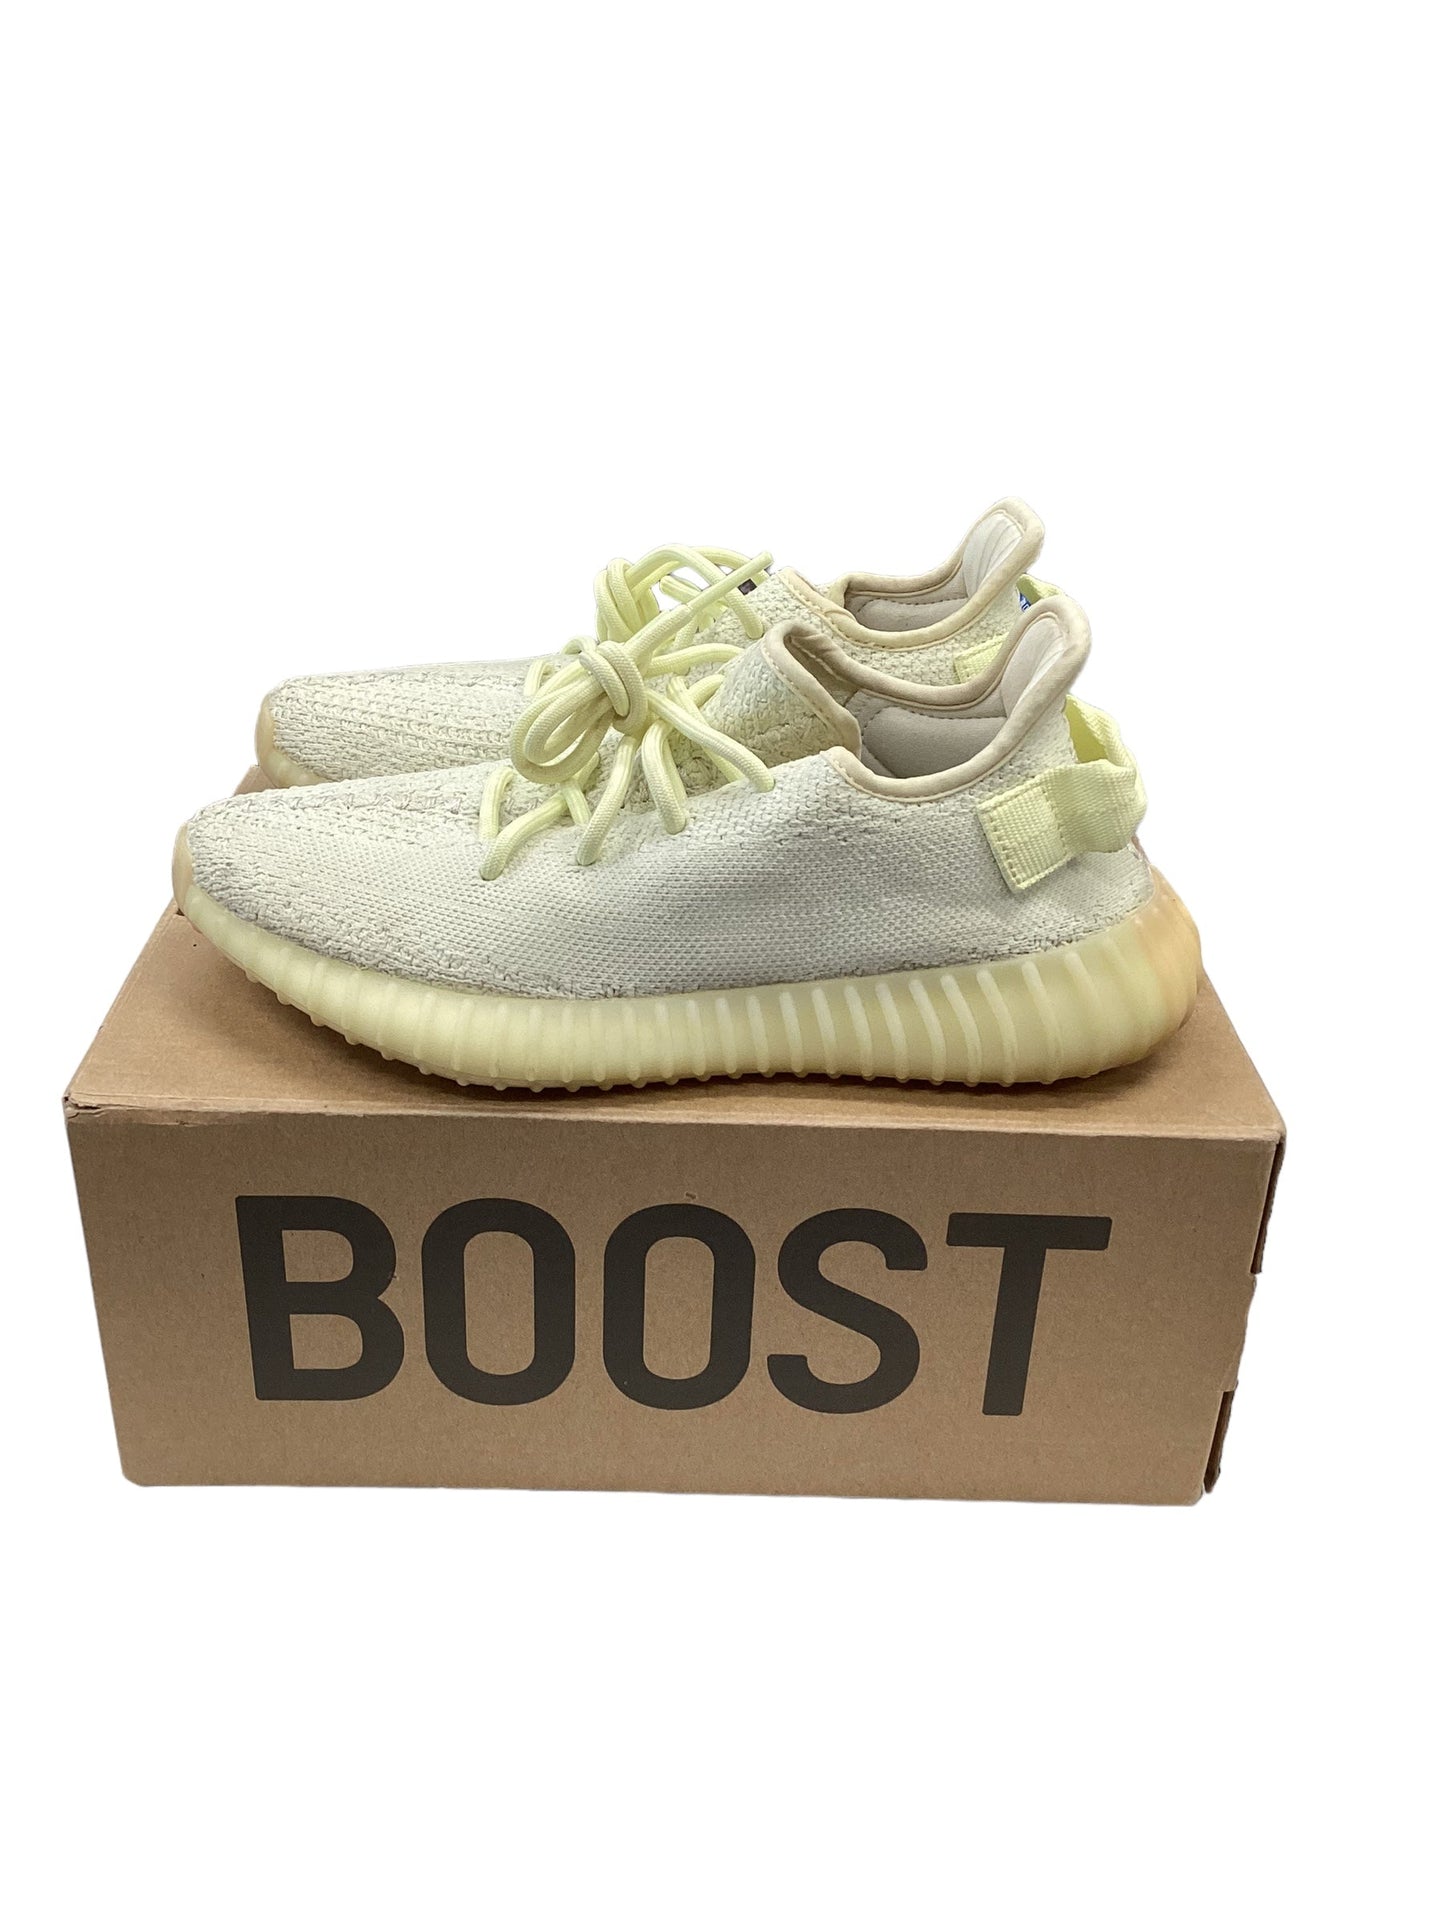 Shoes Designer By Yeezy  Size: 6